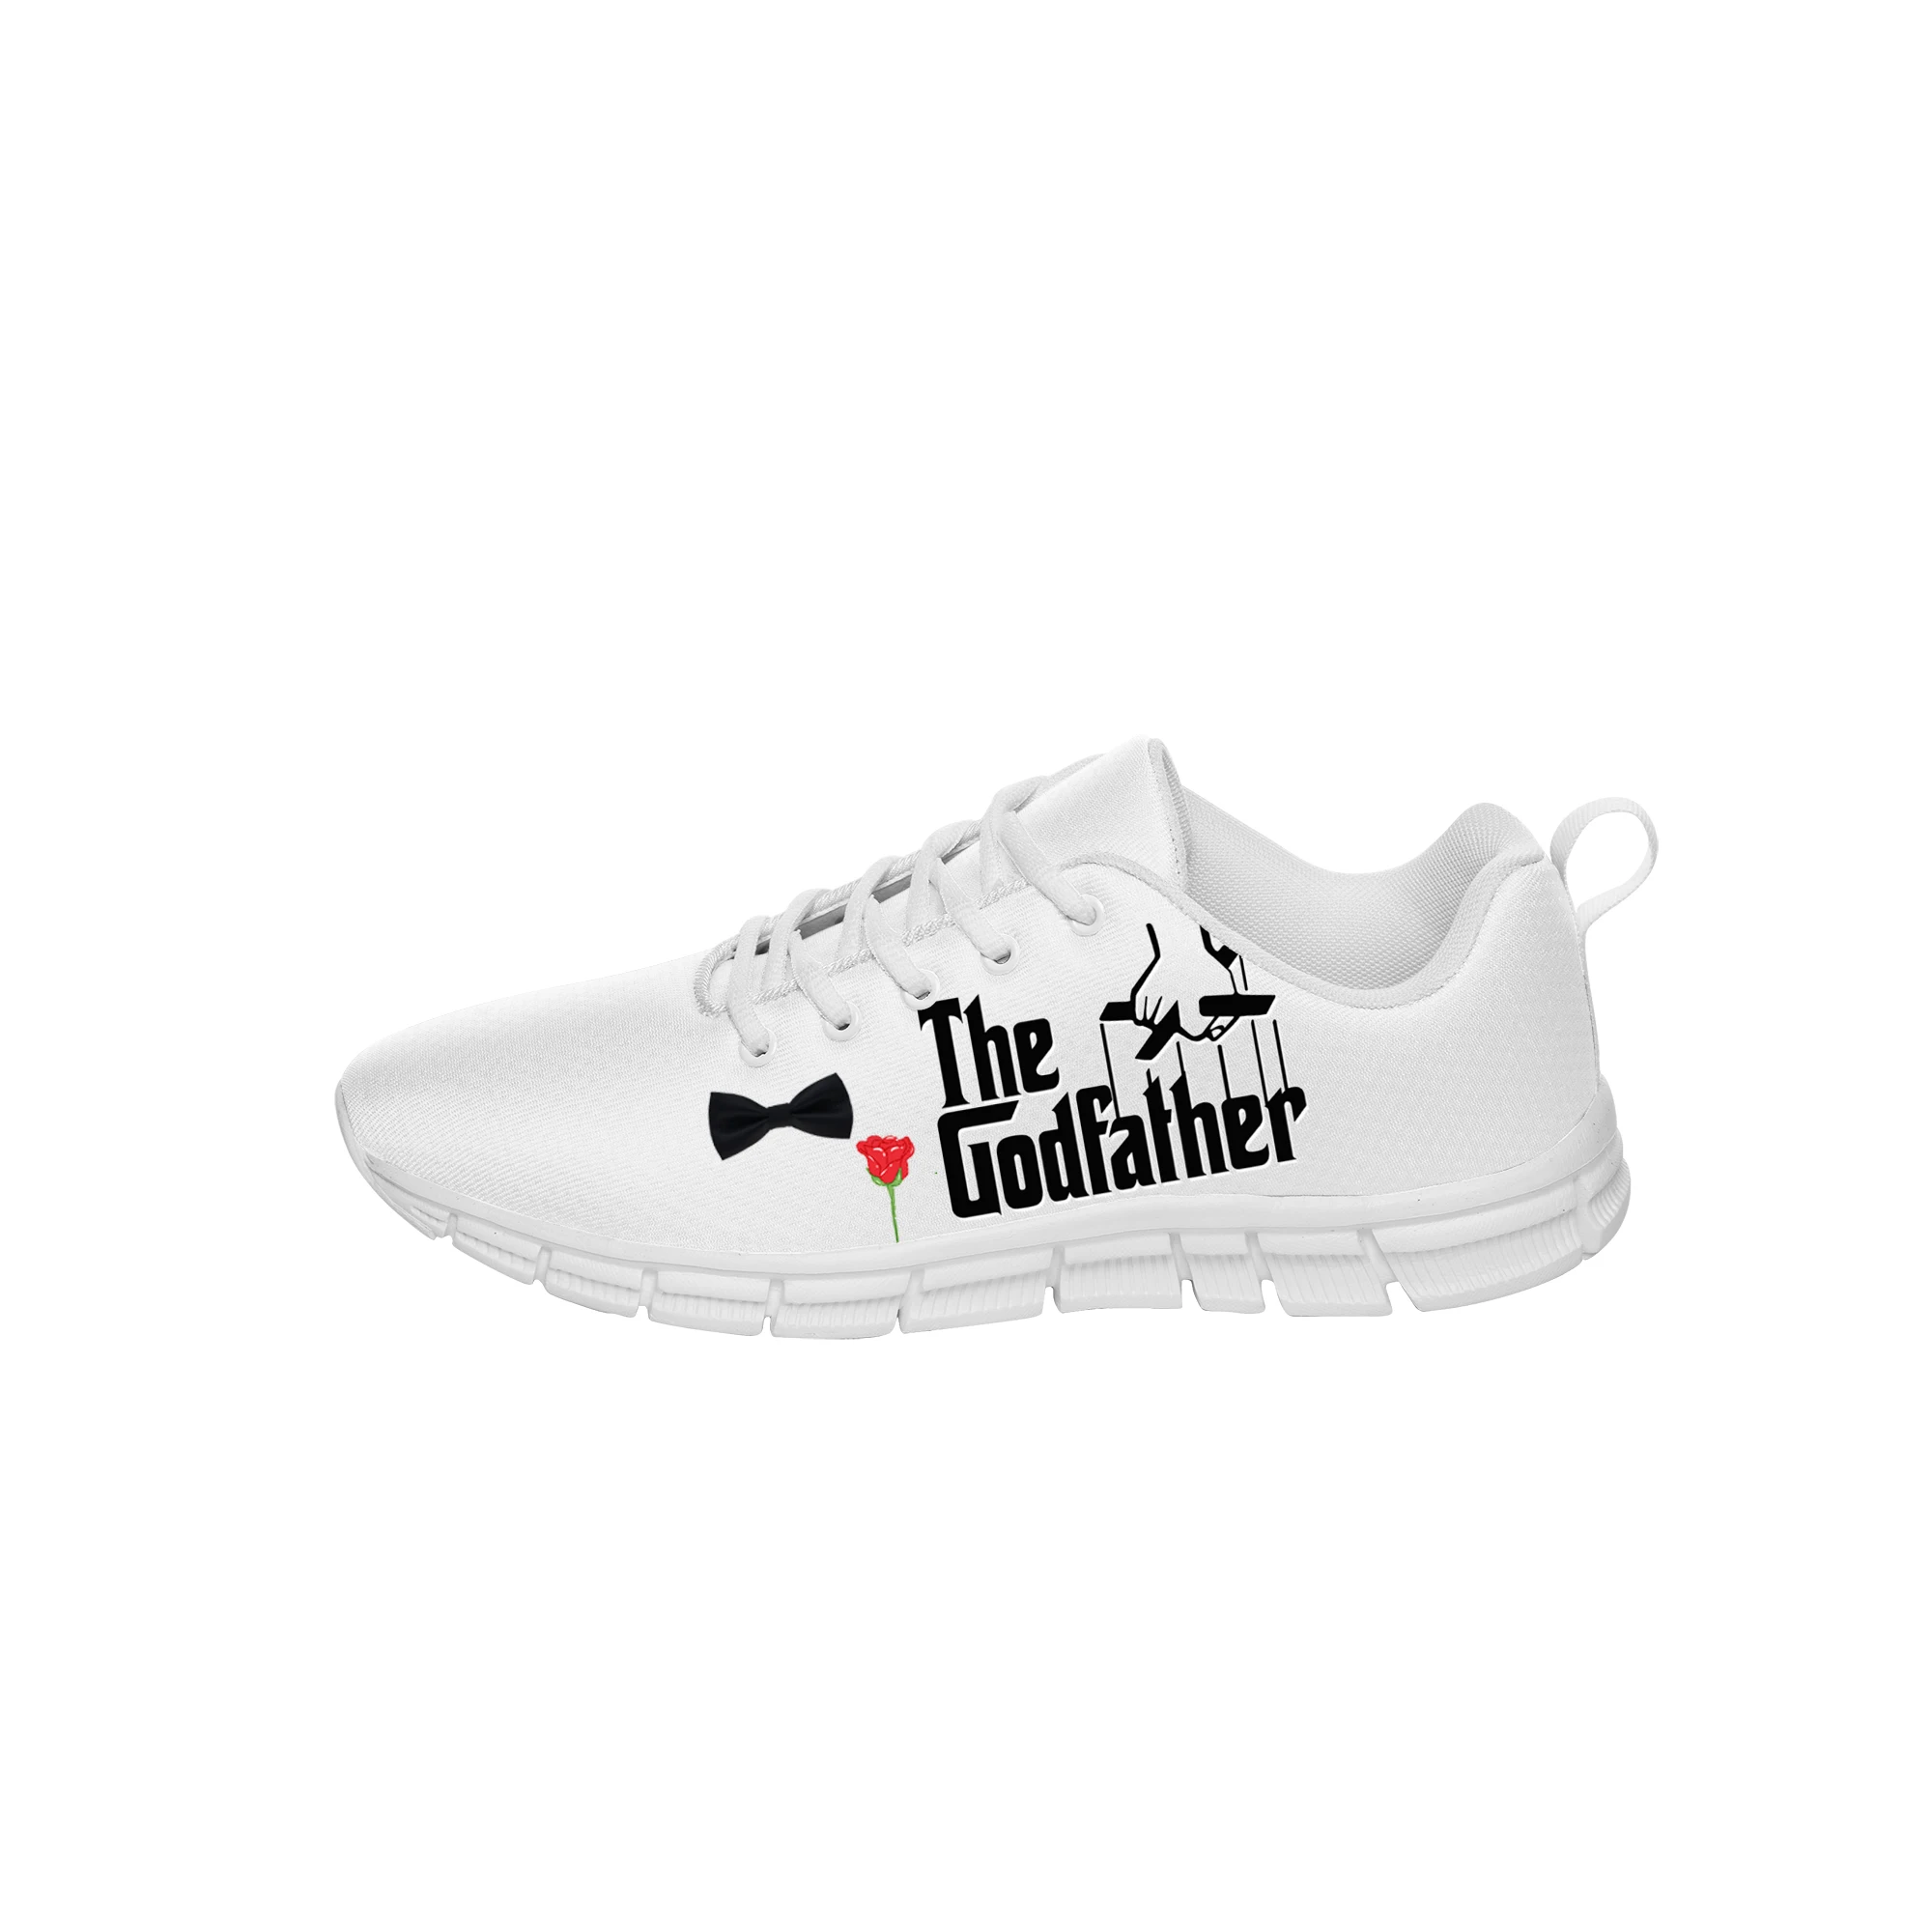 Godfather Shoes on Instagram: 